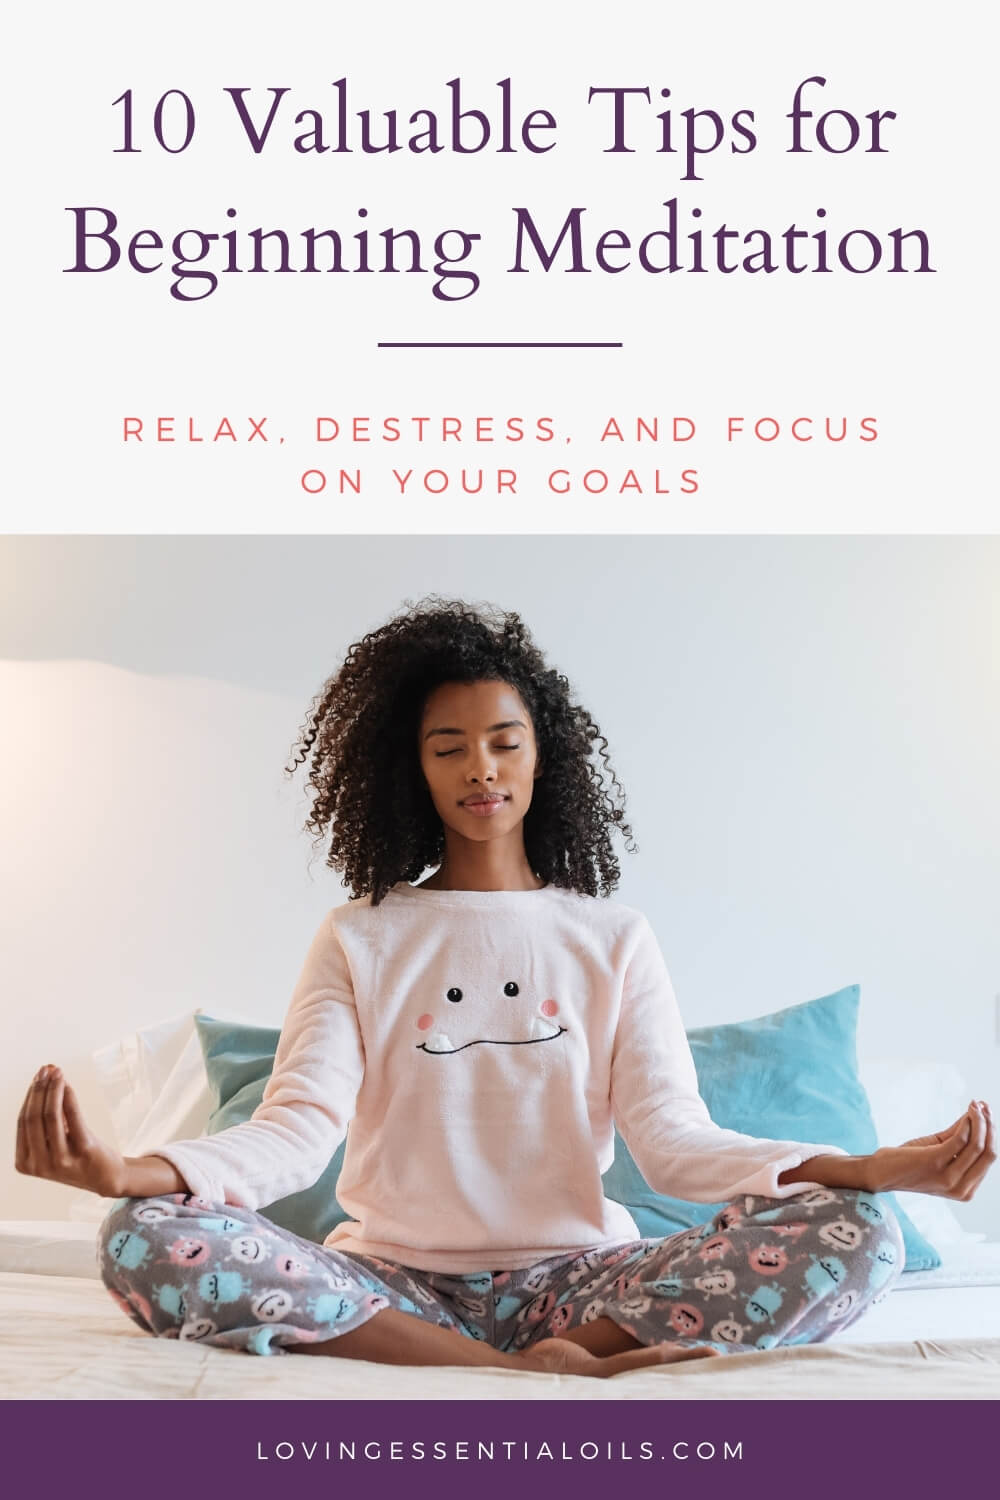 Starting Meditation for Beginners by Loving Essential Oils